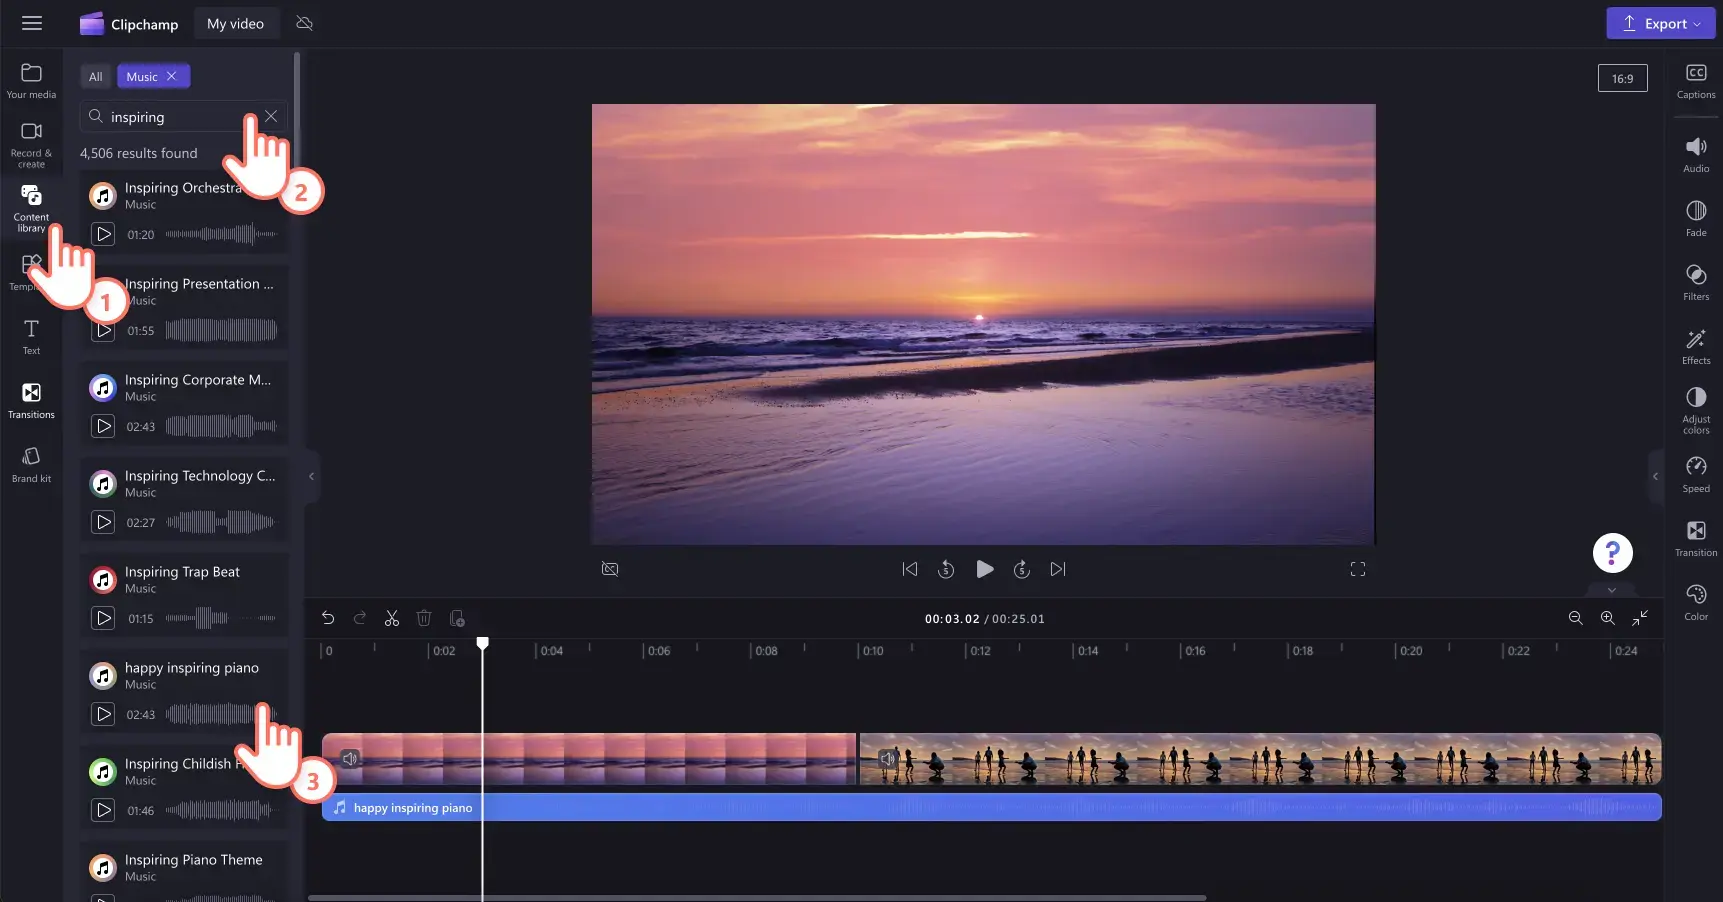 A screenshot of Clipchamp's interface where you can drag and drop music tracks into your video